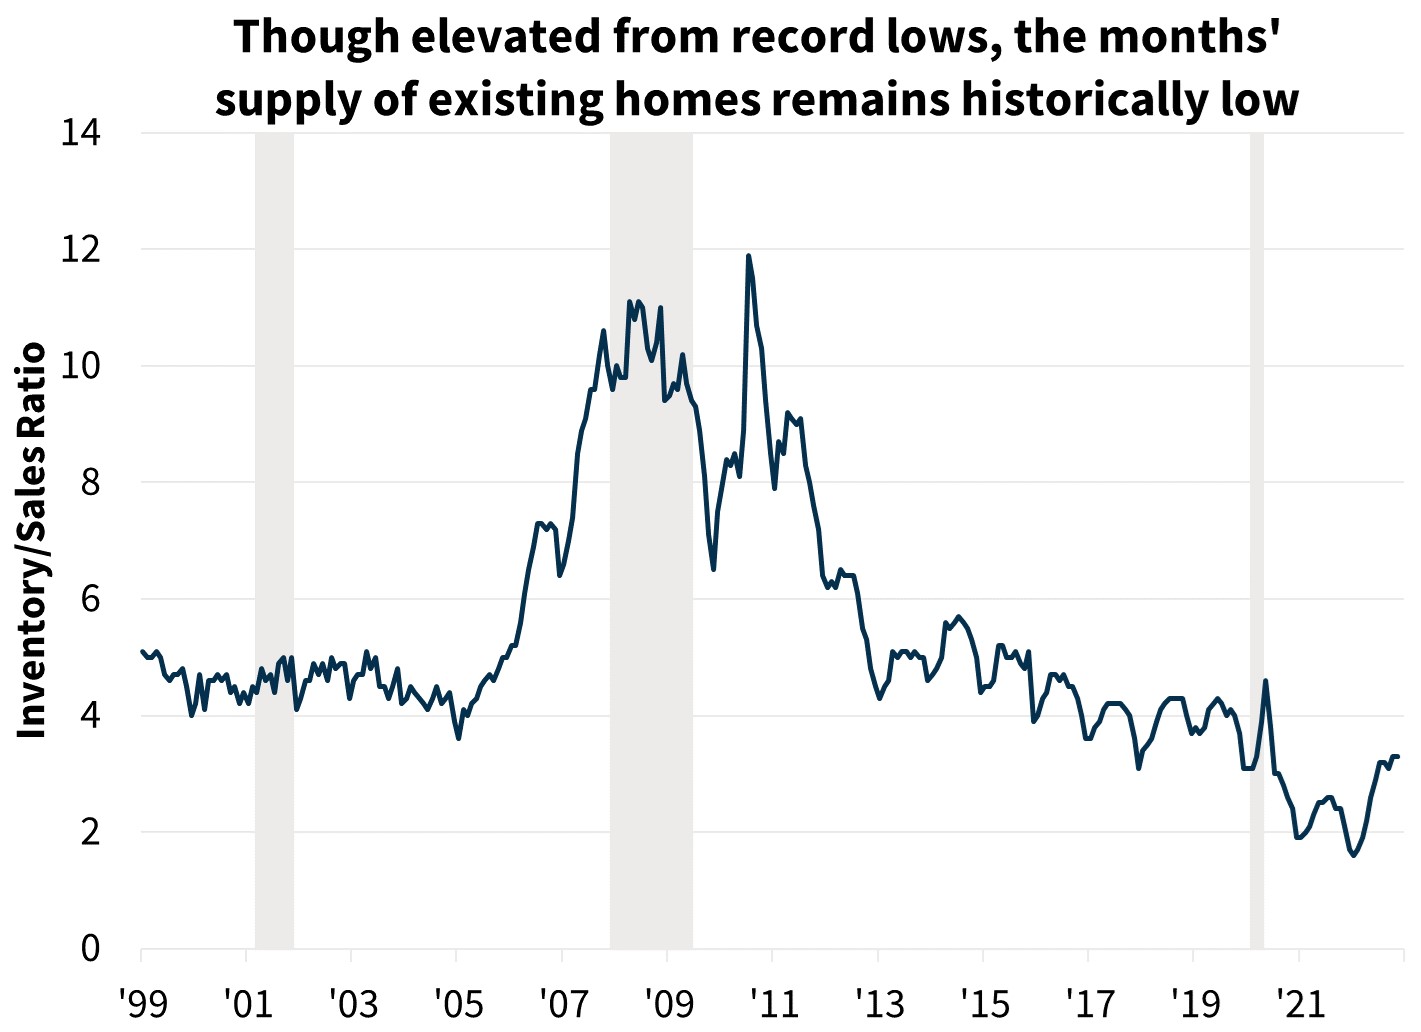  Though elevated from record lows, the months' supply of existing homes remains historically low 